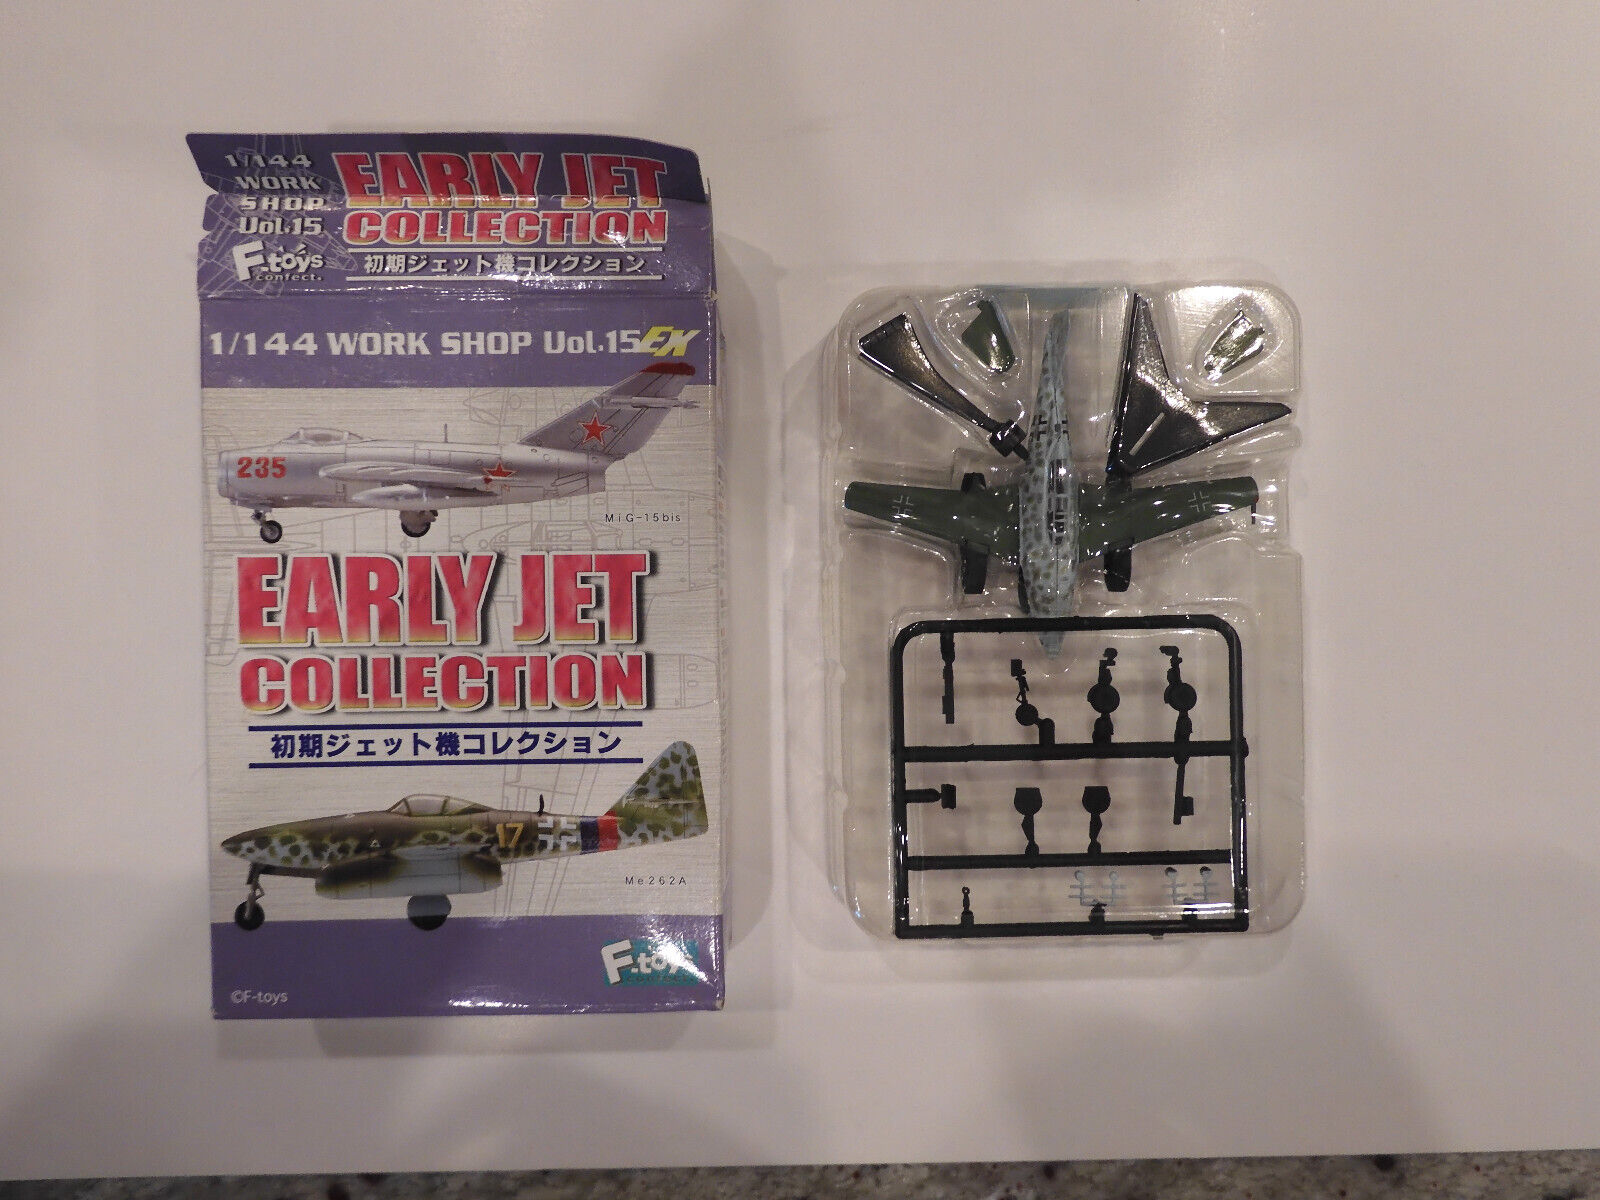 EARLY JET COLLECTION 1/144 - Me262B - Work Shop VOL. 15 - F-Toys - NEW - Opened